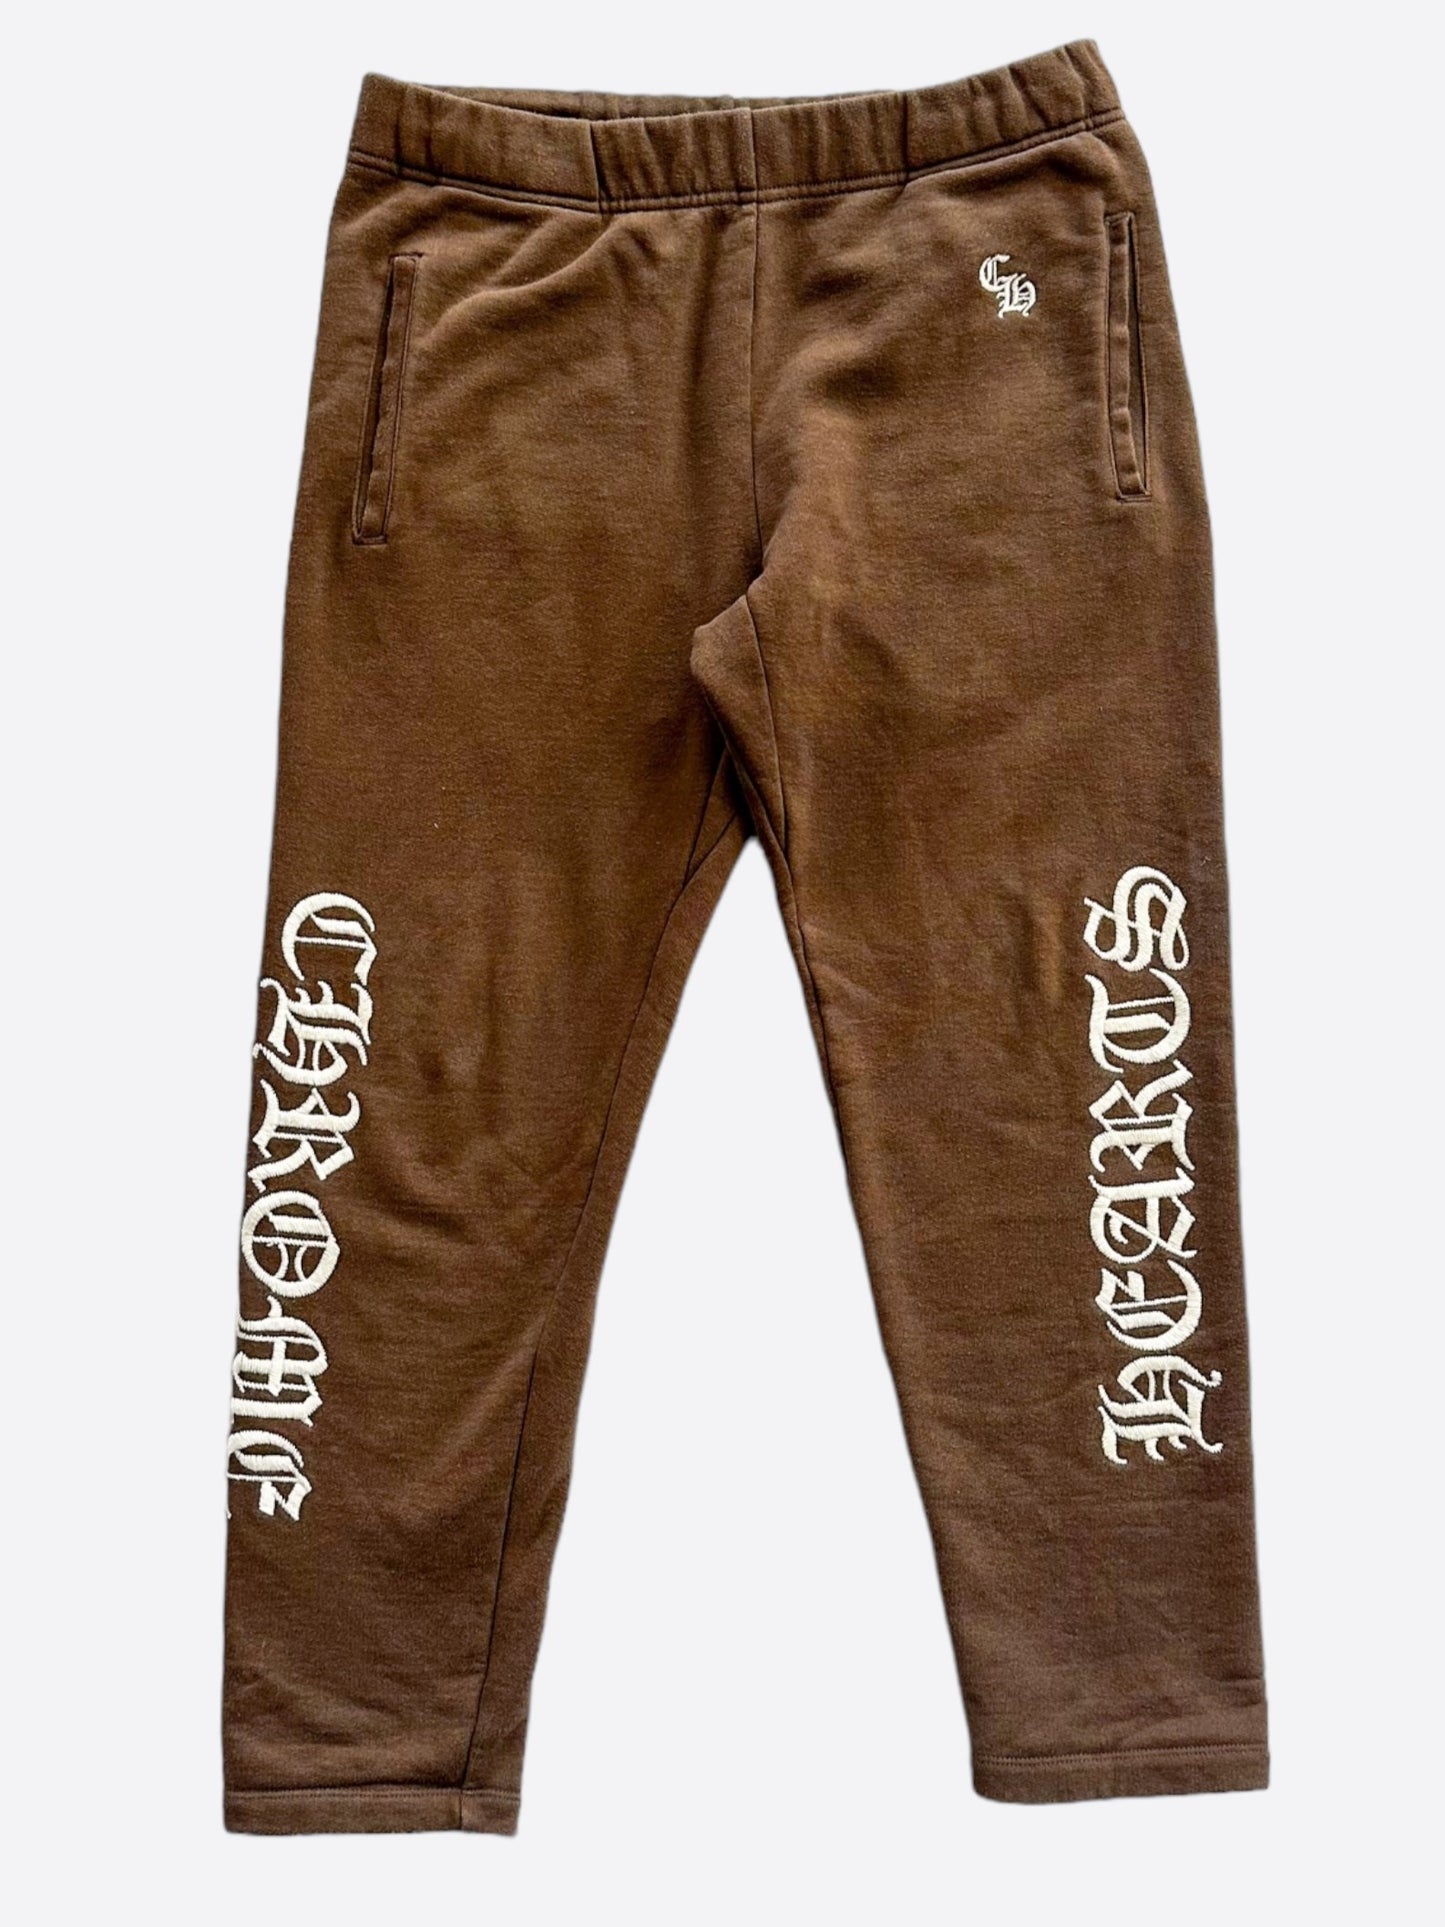 Chrome Hearts Brown & White Slo Ride Embroidered Sweatpants